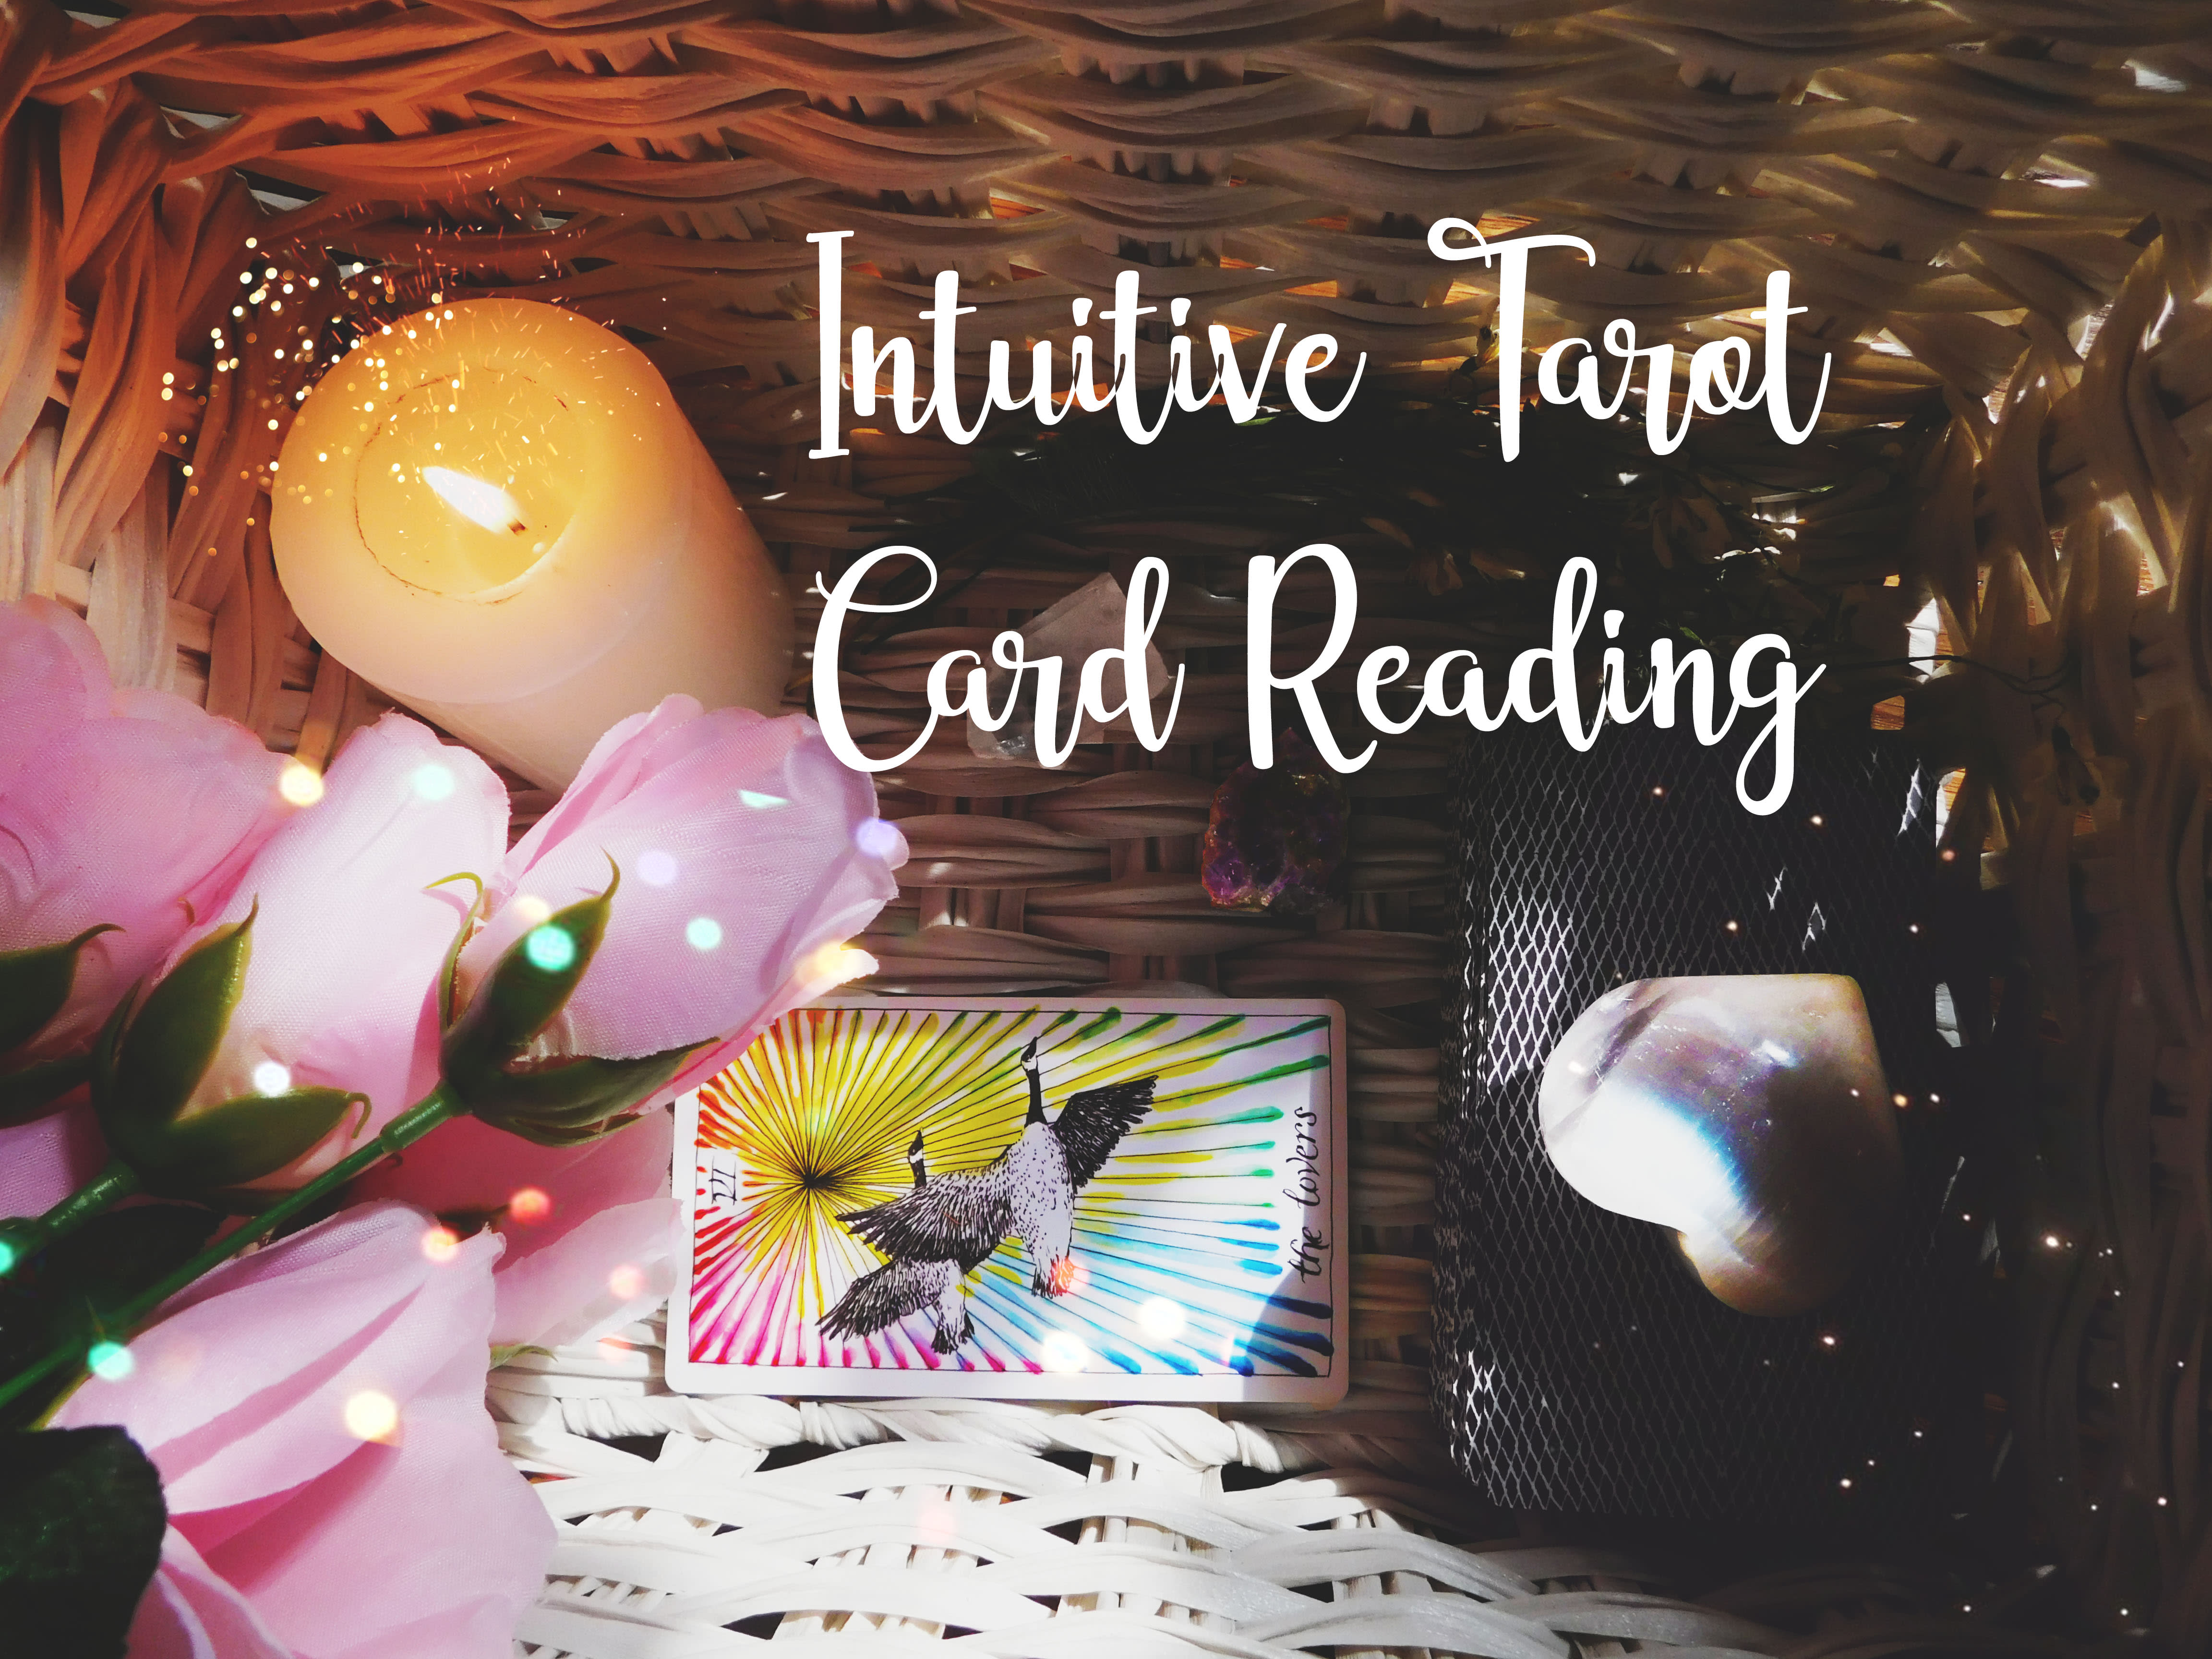 Legepladsudstyr gas Andragende Provide you an intuitive tarot card reading by Authenticwitch | Fiverr